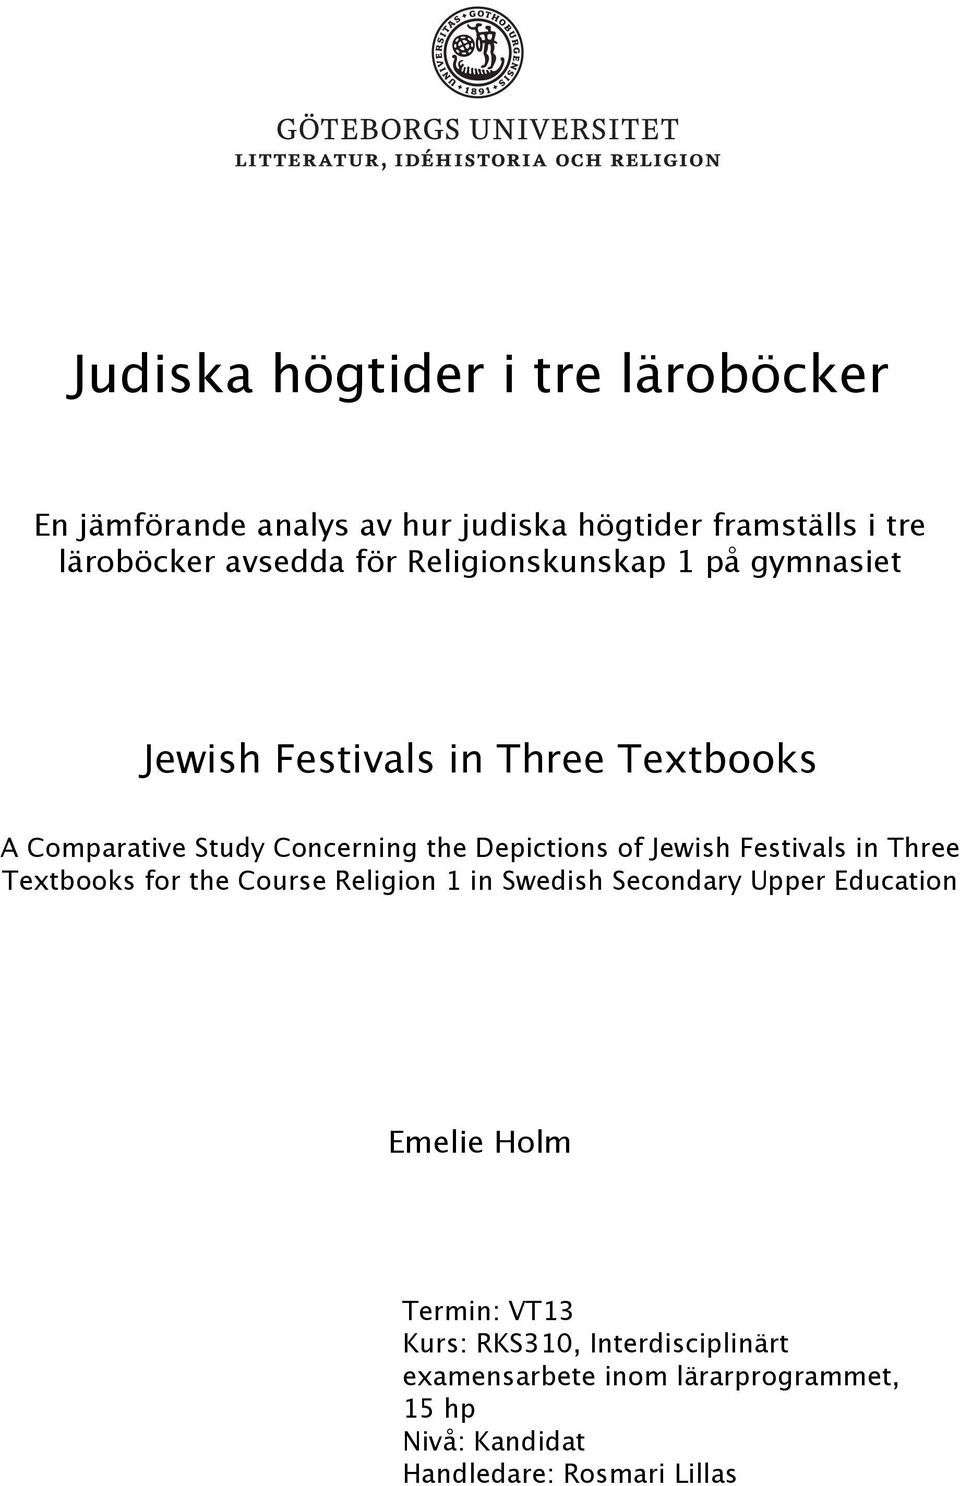 Jewish Festivals in Three Textbooks for the Course Religion 1 in Swedish Secondary Upper Education Emelie Holm Termin: